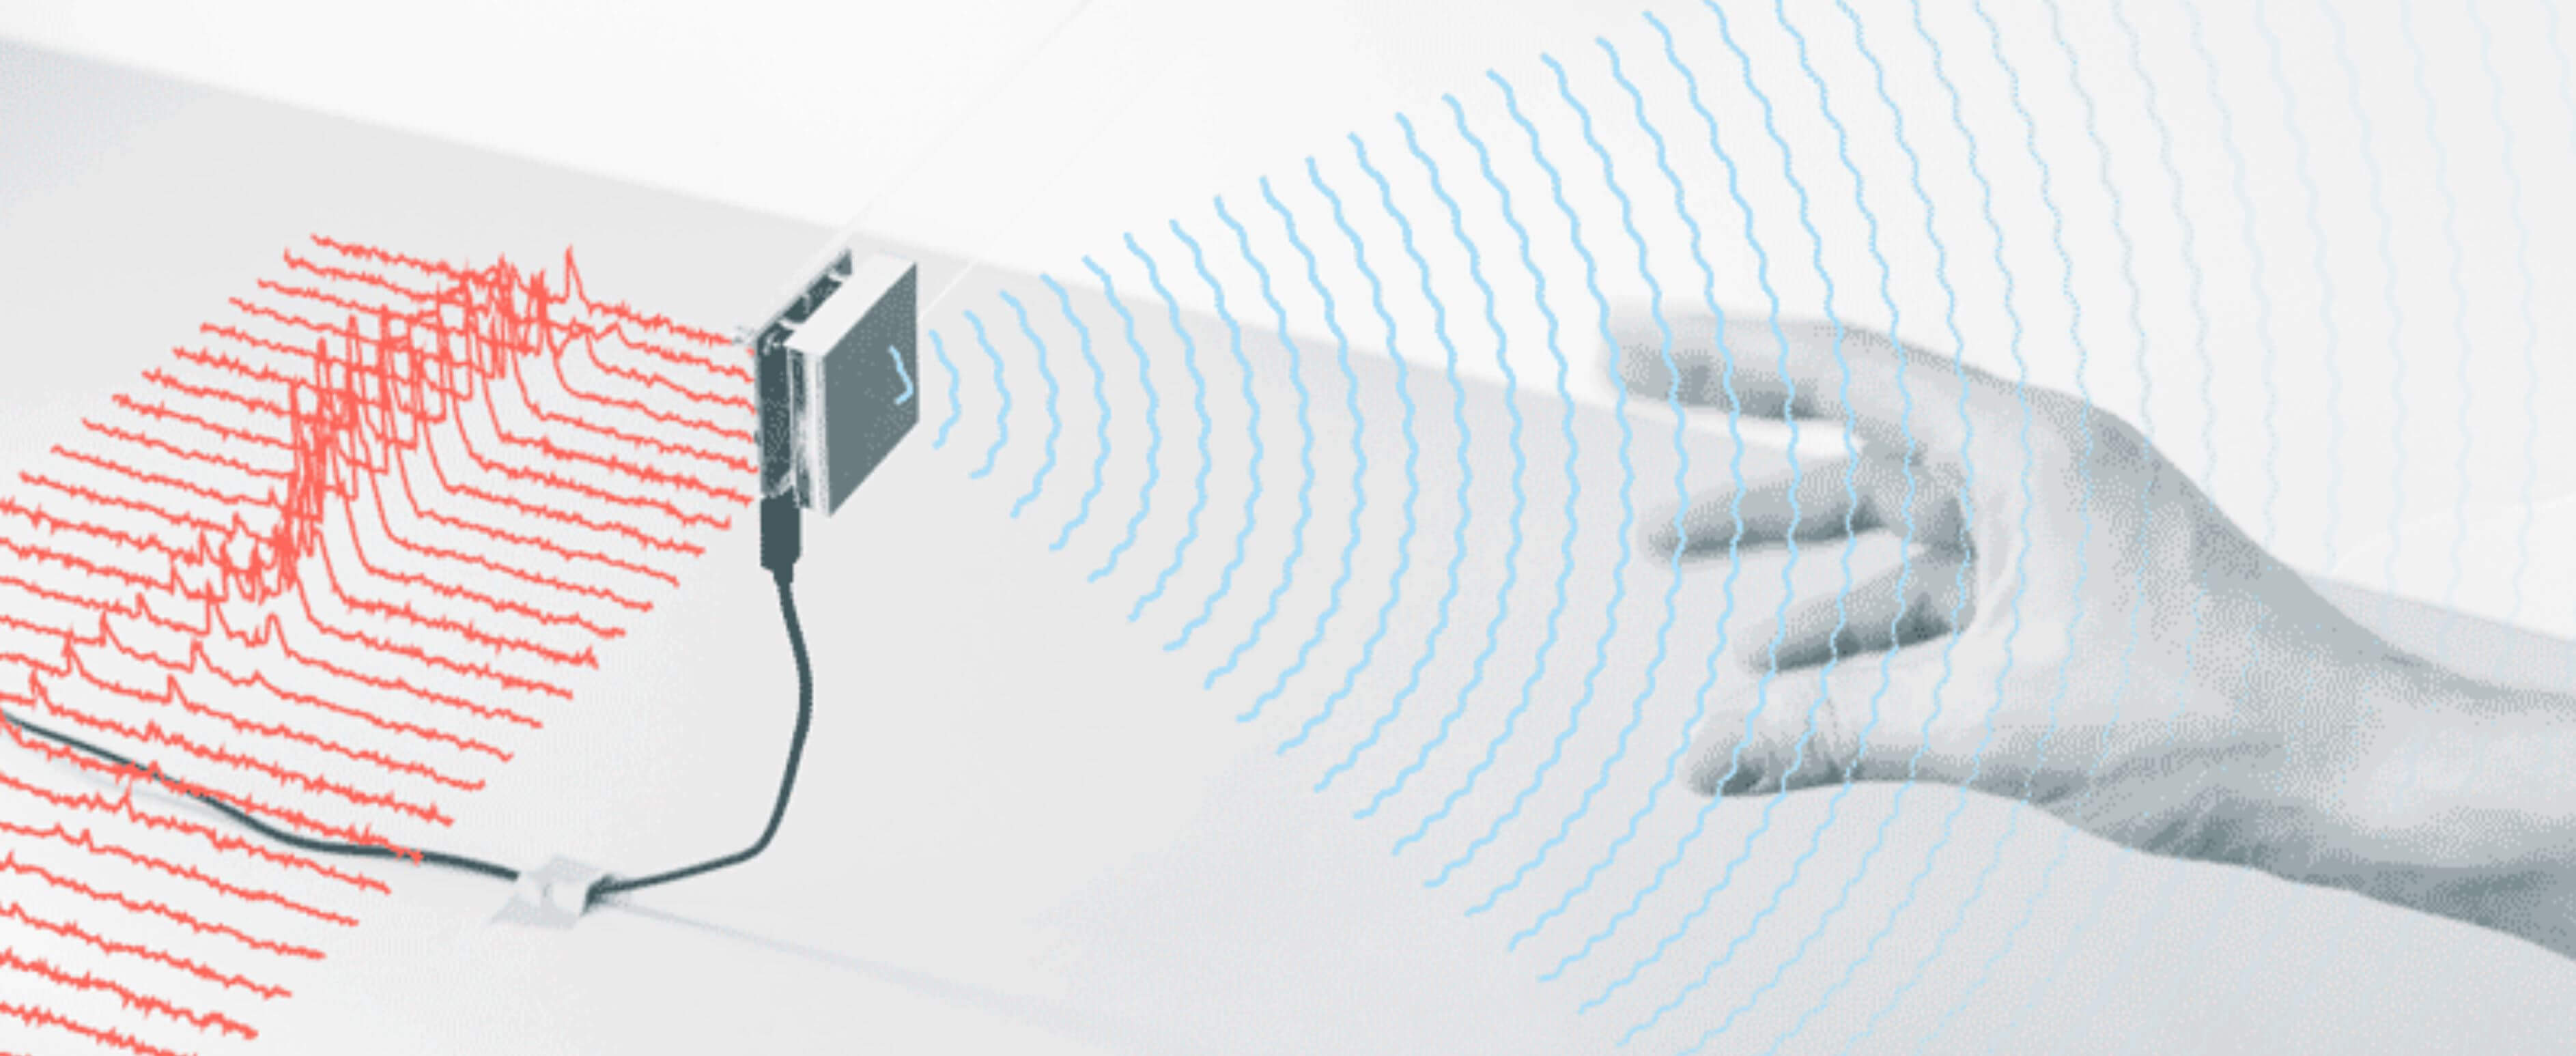 Google gets permission to operate Soli gesture detection radar at higher powers